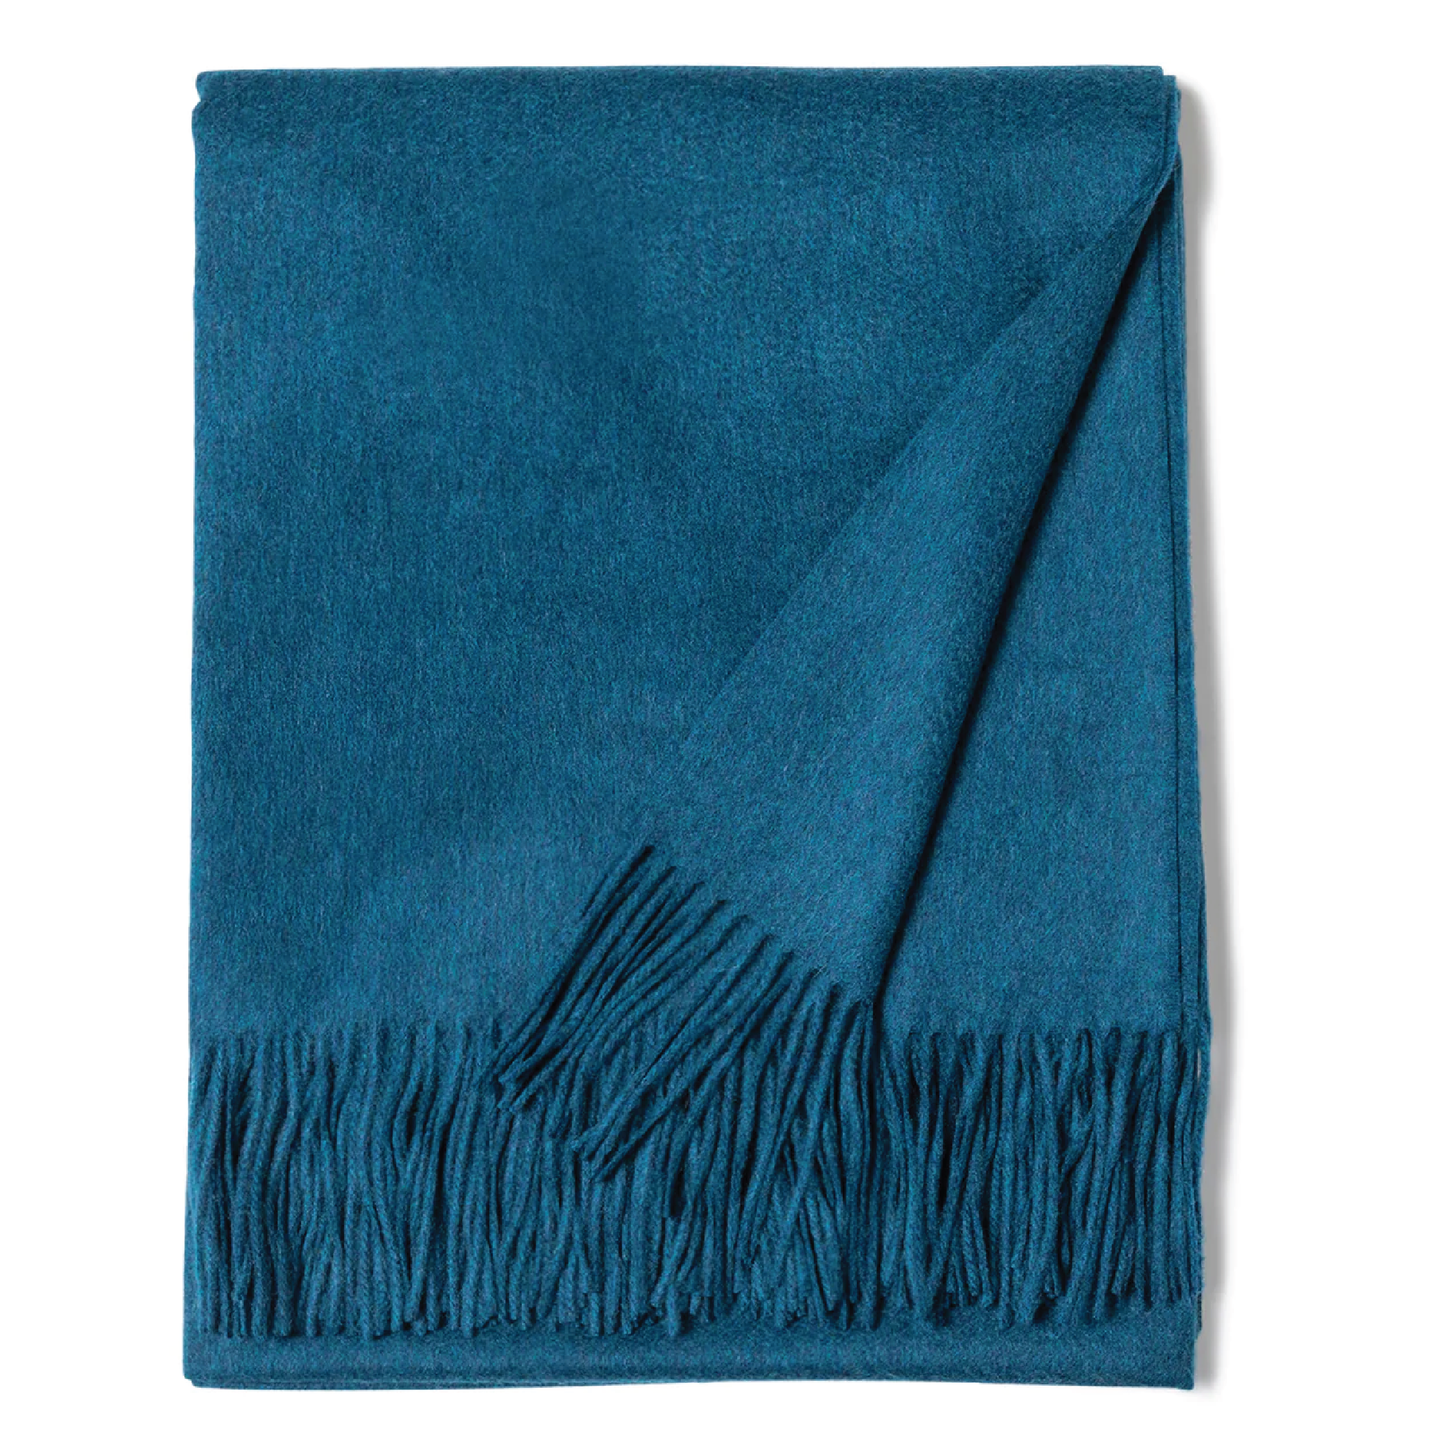 Sophia Cashmere, Trentino Throw - Multiple Colors Available